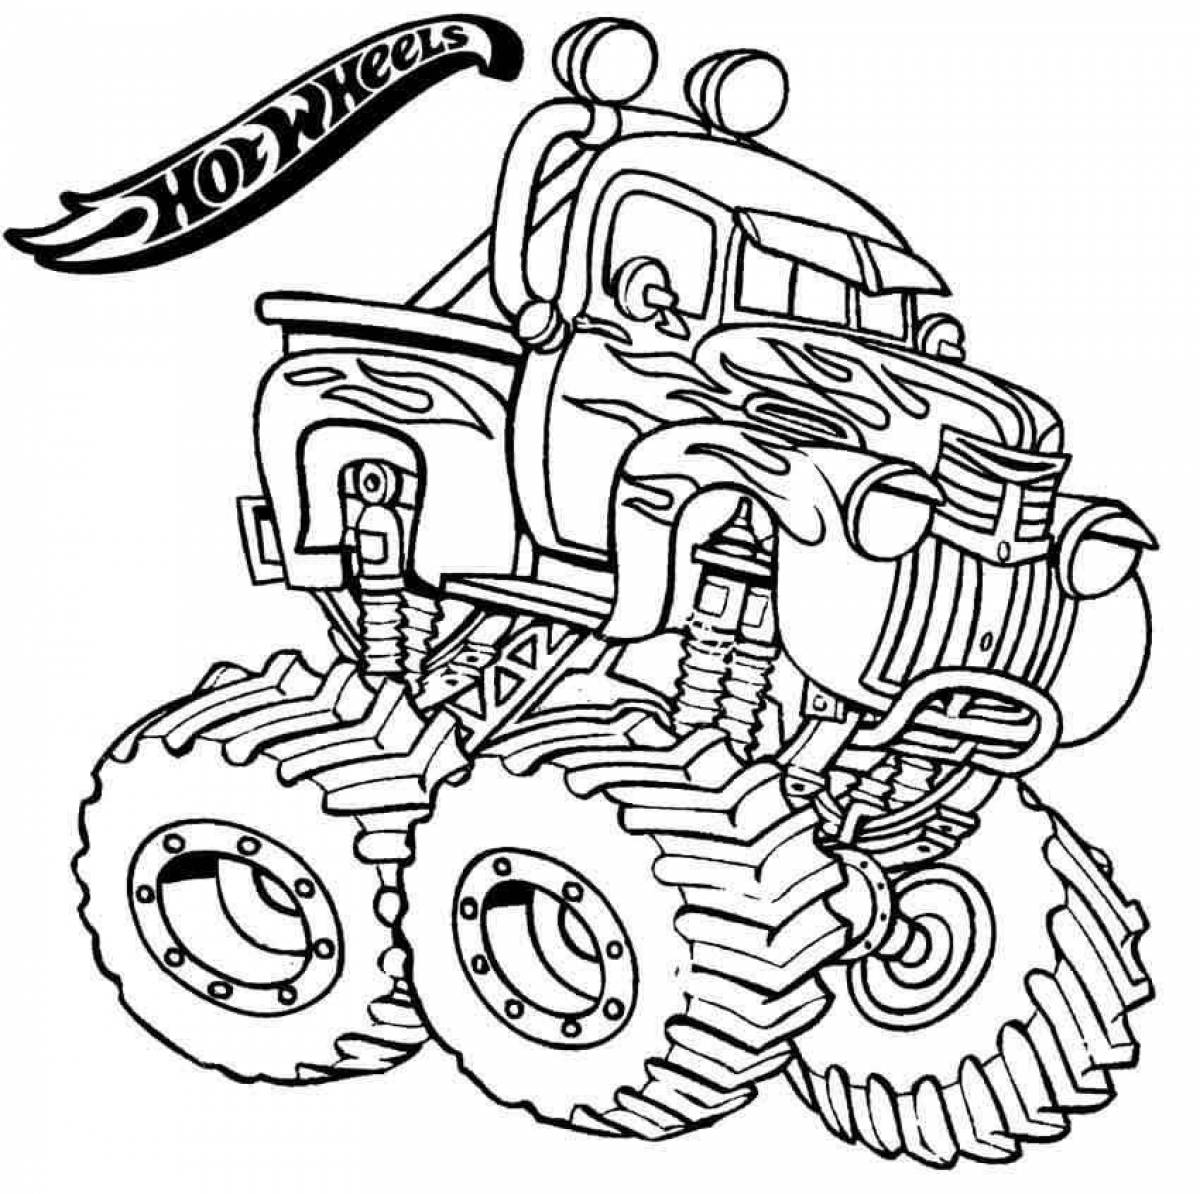 Monstrously rich monster truck coloring book